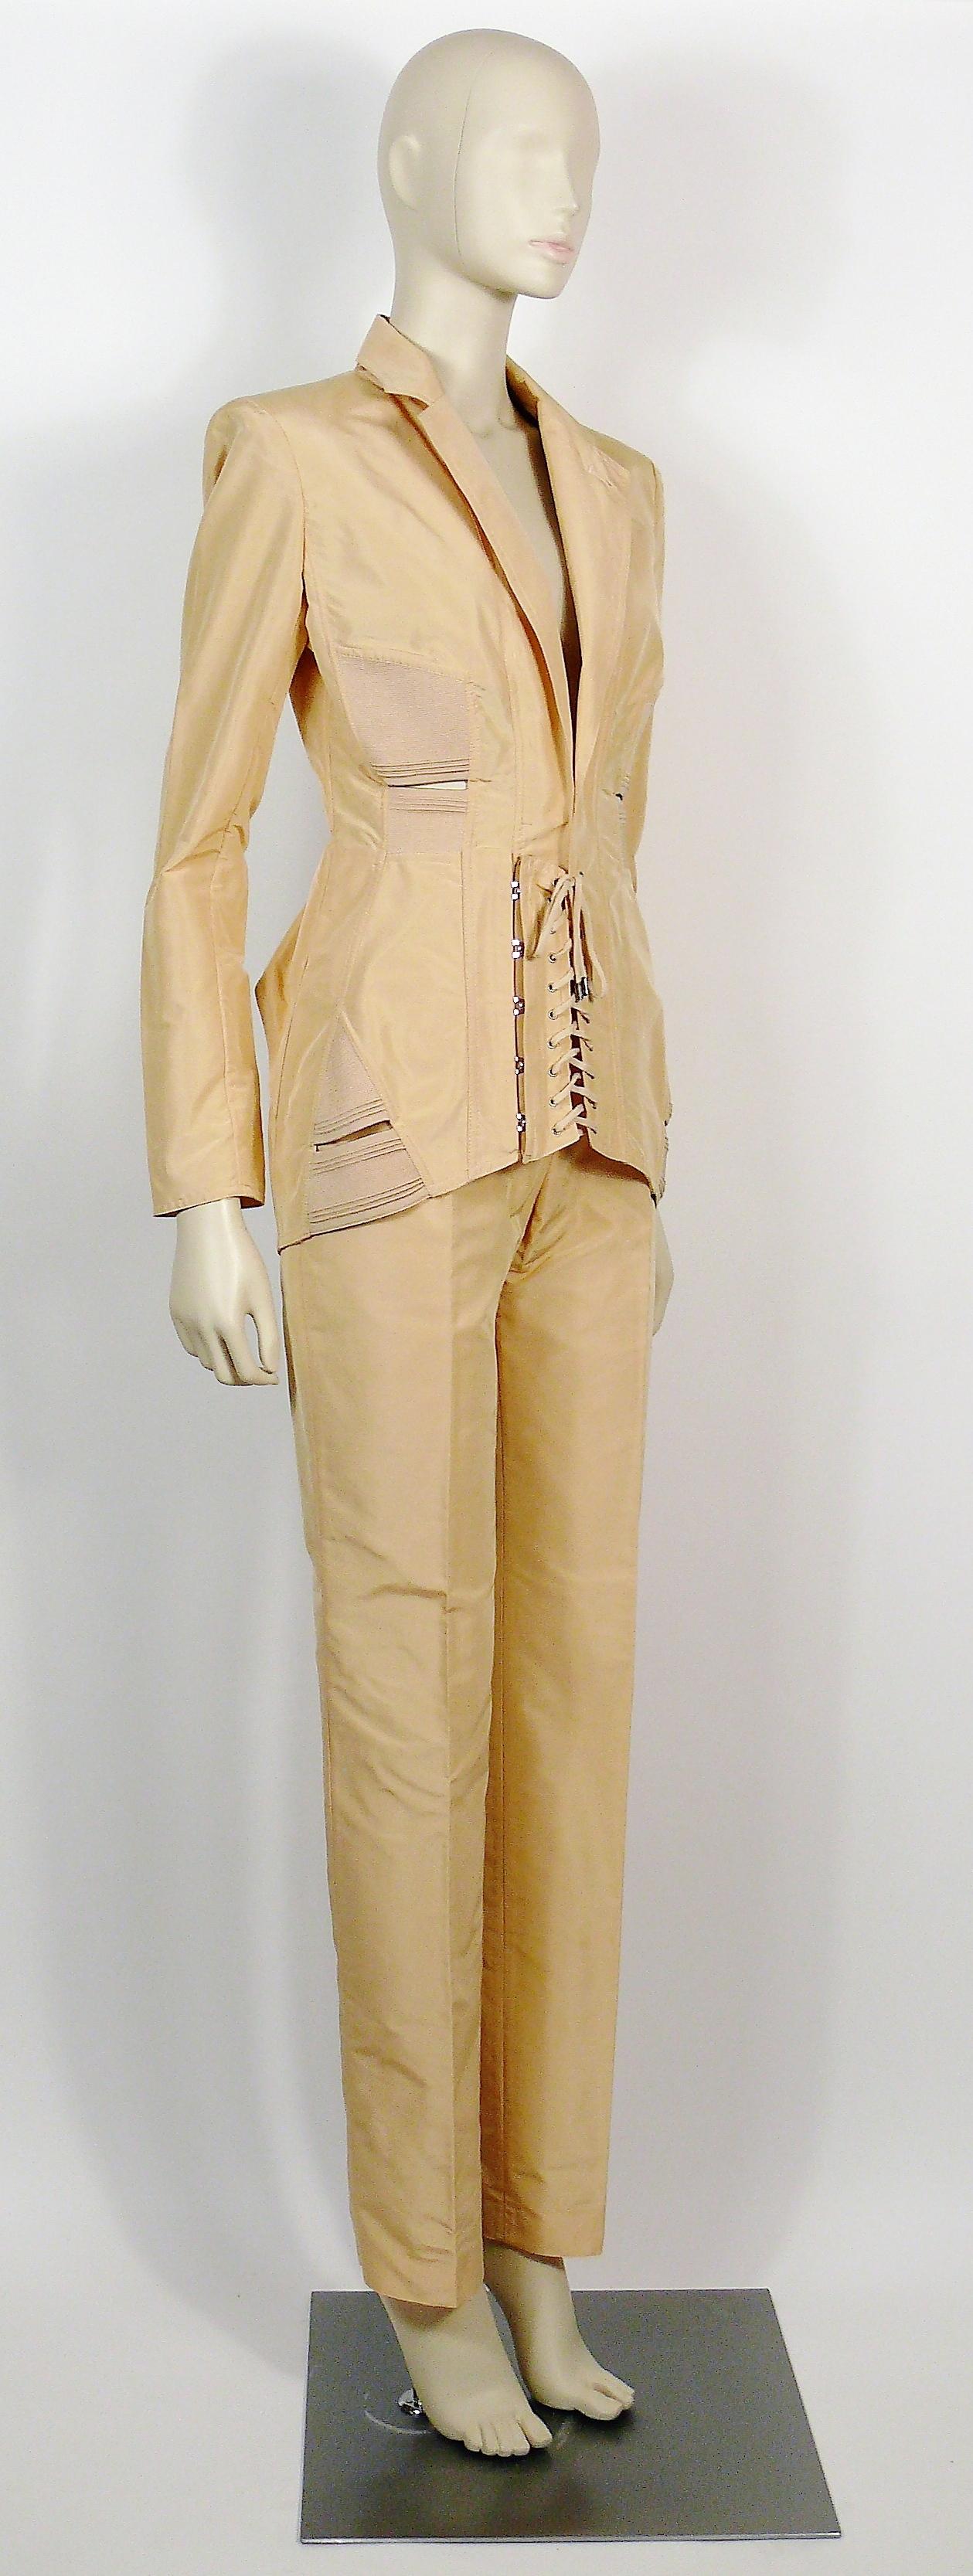 JEAN PAUL GAULTIER iconic vintage peach corset-inspired blazer and pant suit.

BLAZER features :
- Long sleeves.
- Lapel collar. 
- Front corset lacing closure front.
- Elastic insets at side and back.
- Elasticized cut-out at side and back.
-